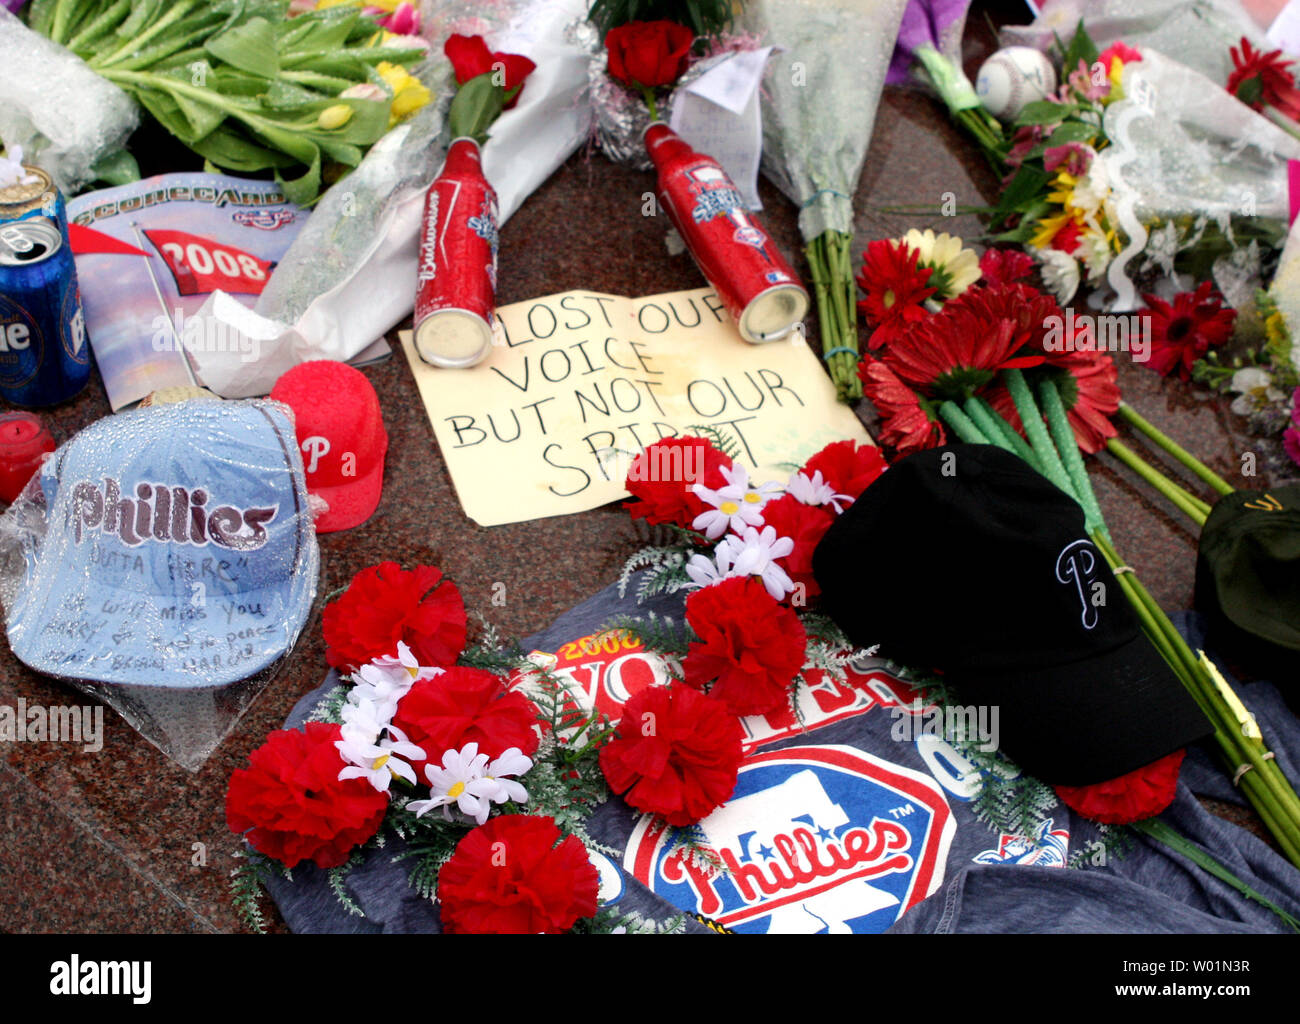 Flowers, notes of remembrance and jerseys are left at the base of a statue  of Philadelphia baseball player Mike Schmidt that has been tuned into a  memorial for longtime Philadelphia Phillies announcer